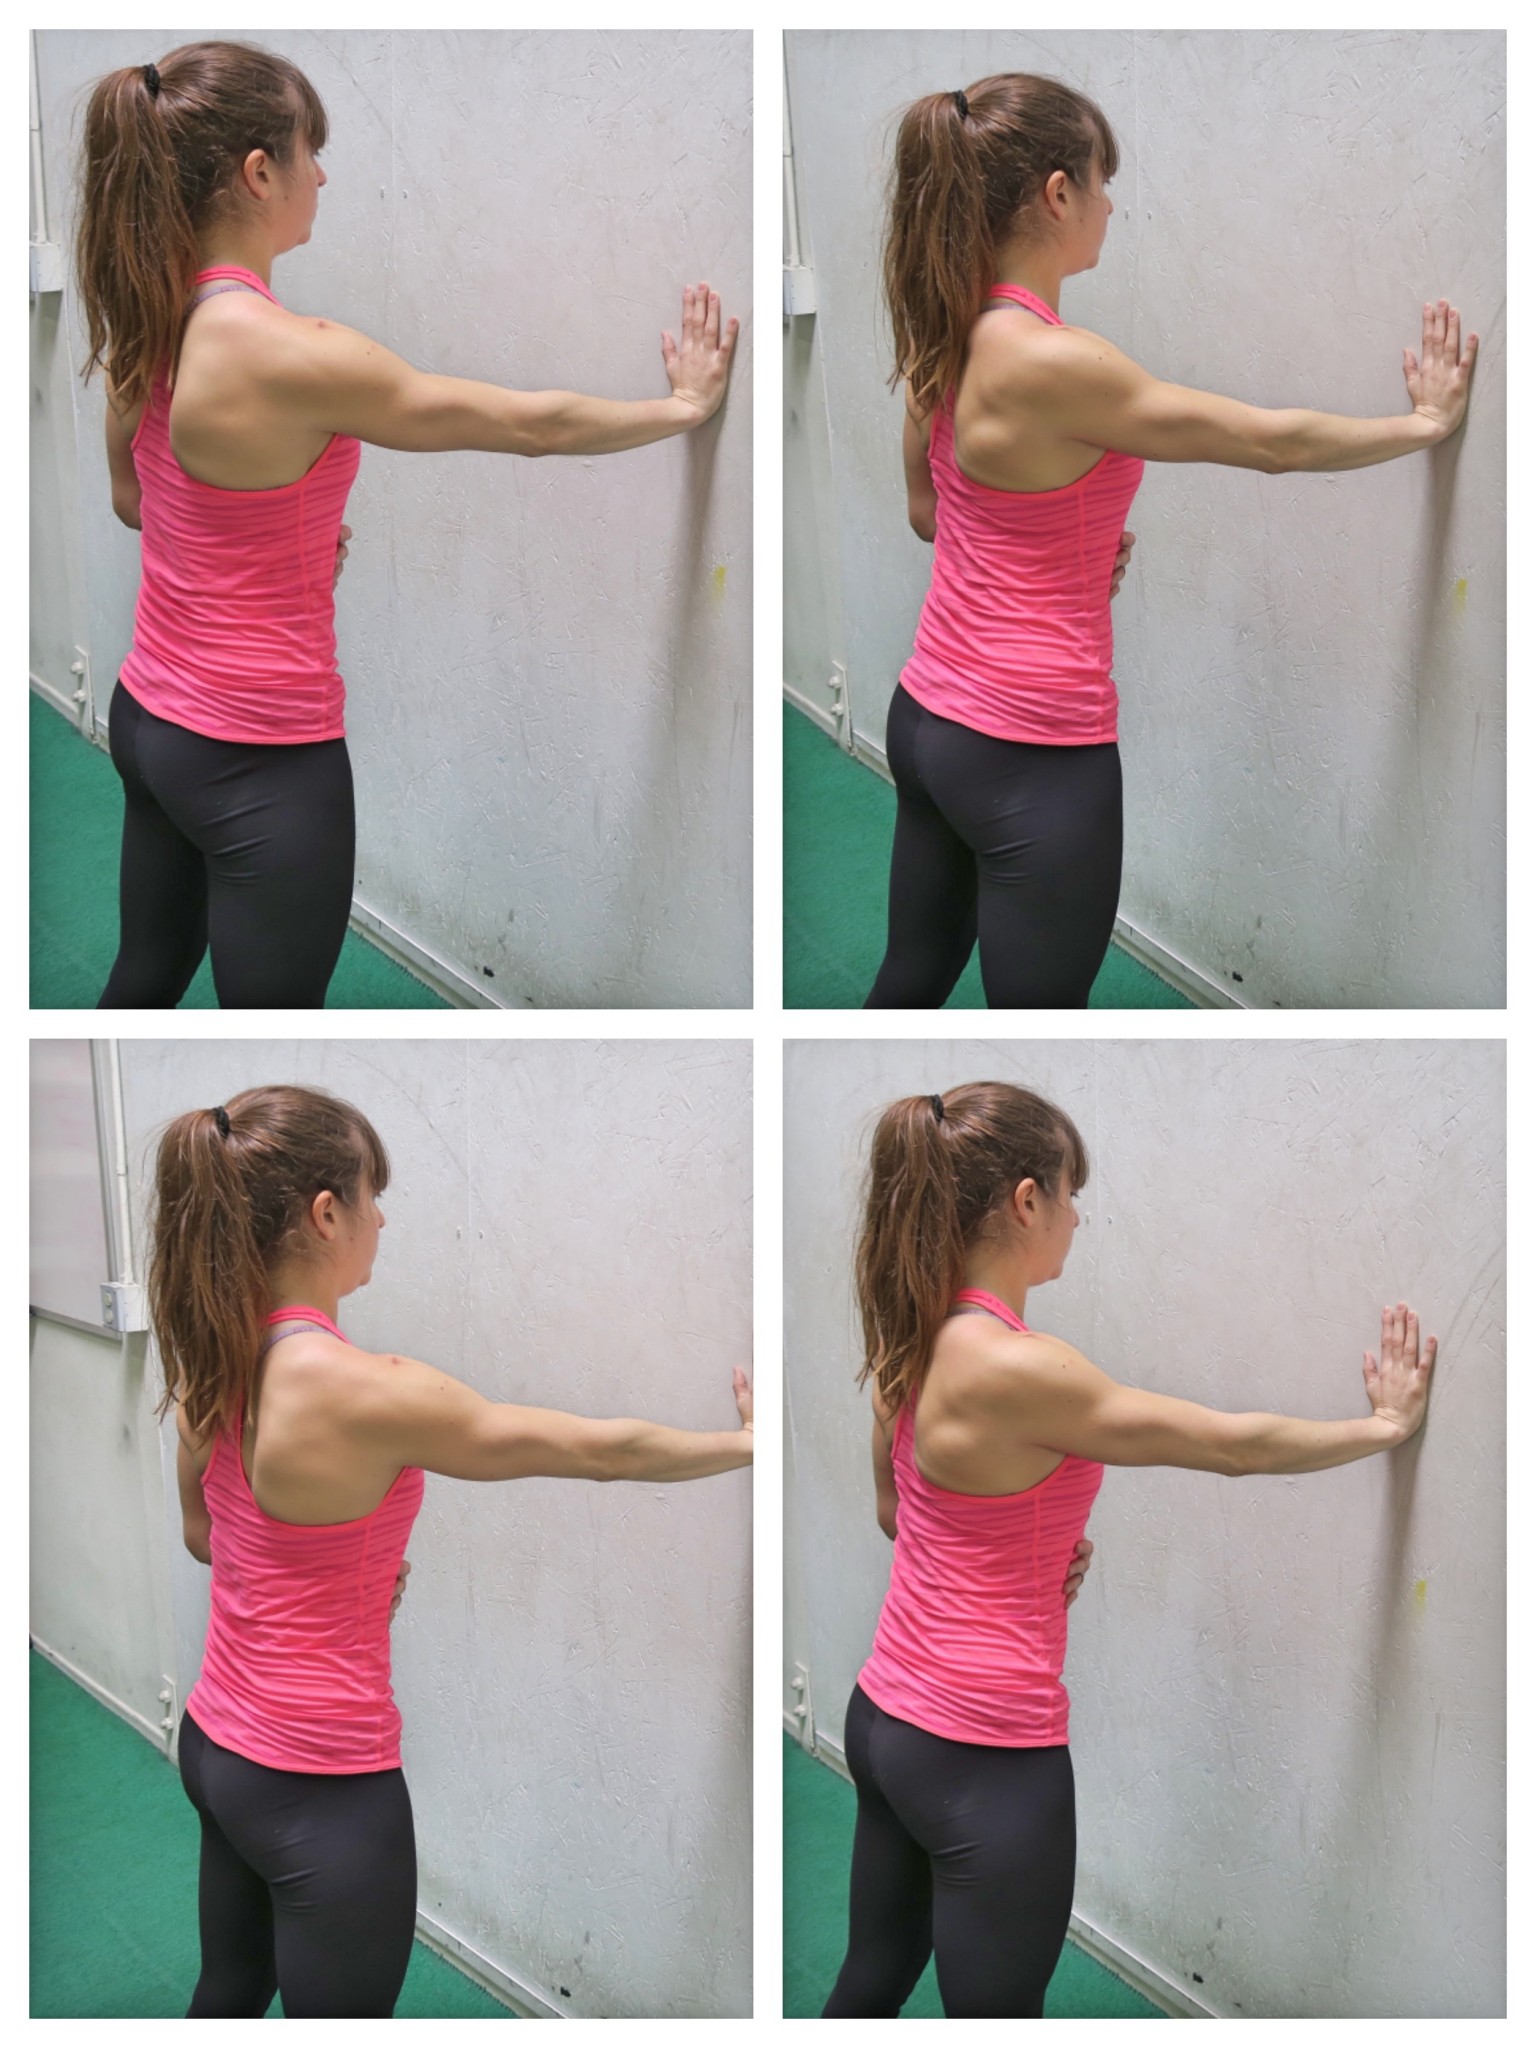 Improve Your Posture And Pull Ups With 5 Moves ...